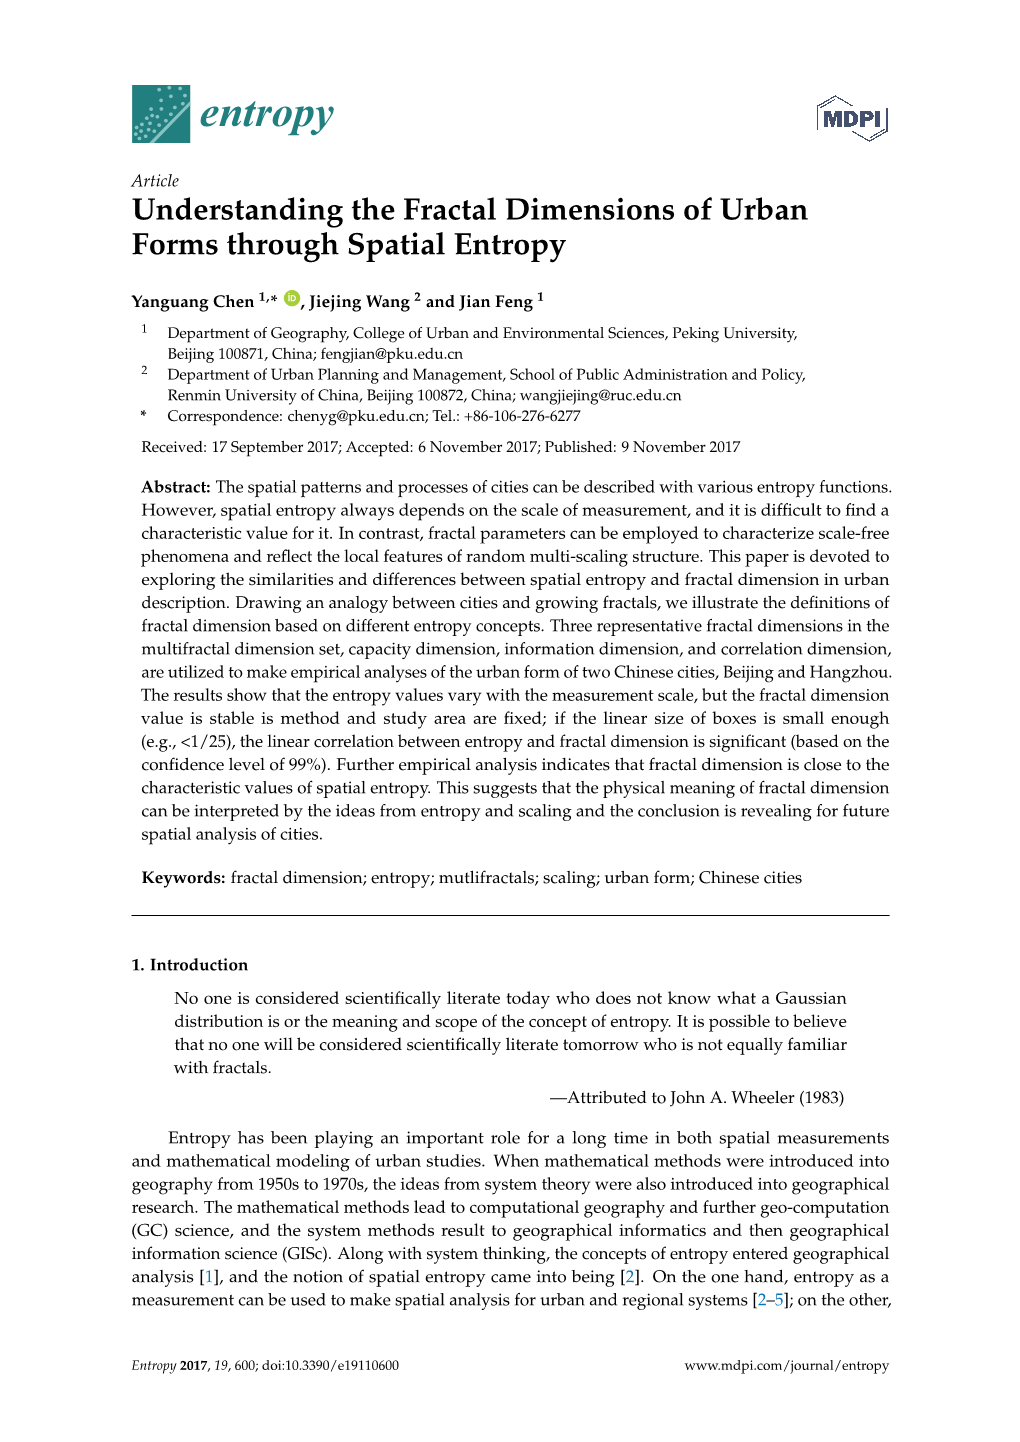 Understanding the Fractal Dimensions of Urban Forms Through Spatial Entropy